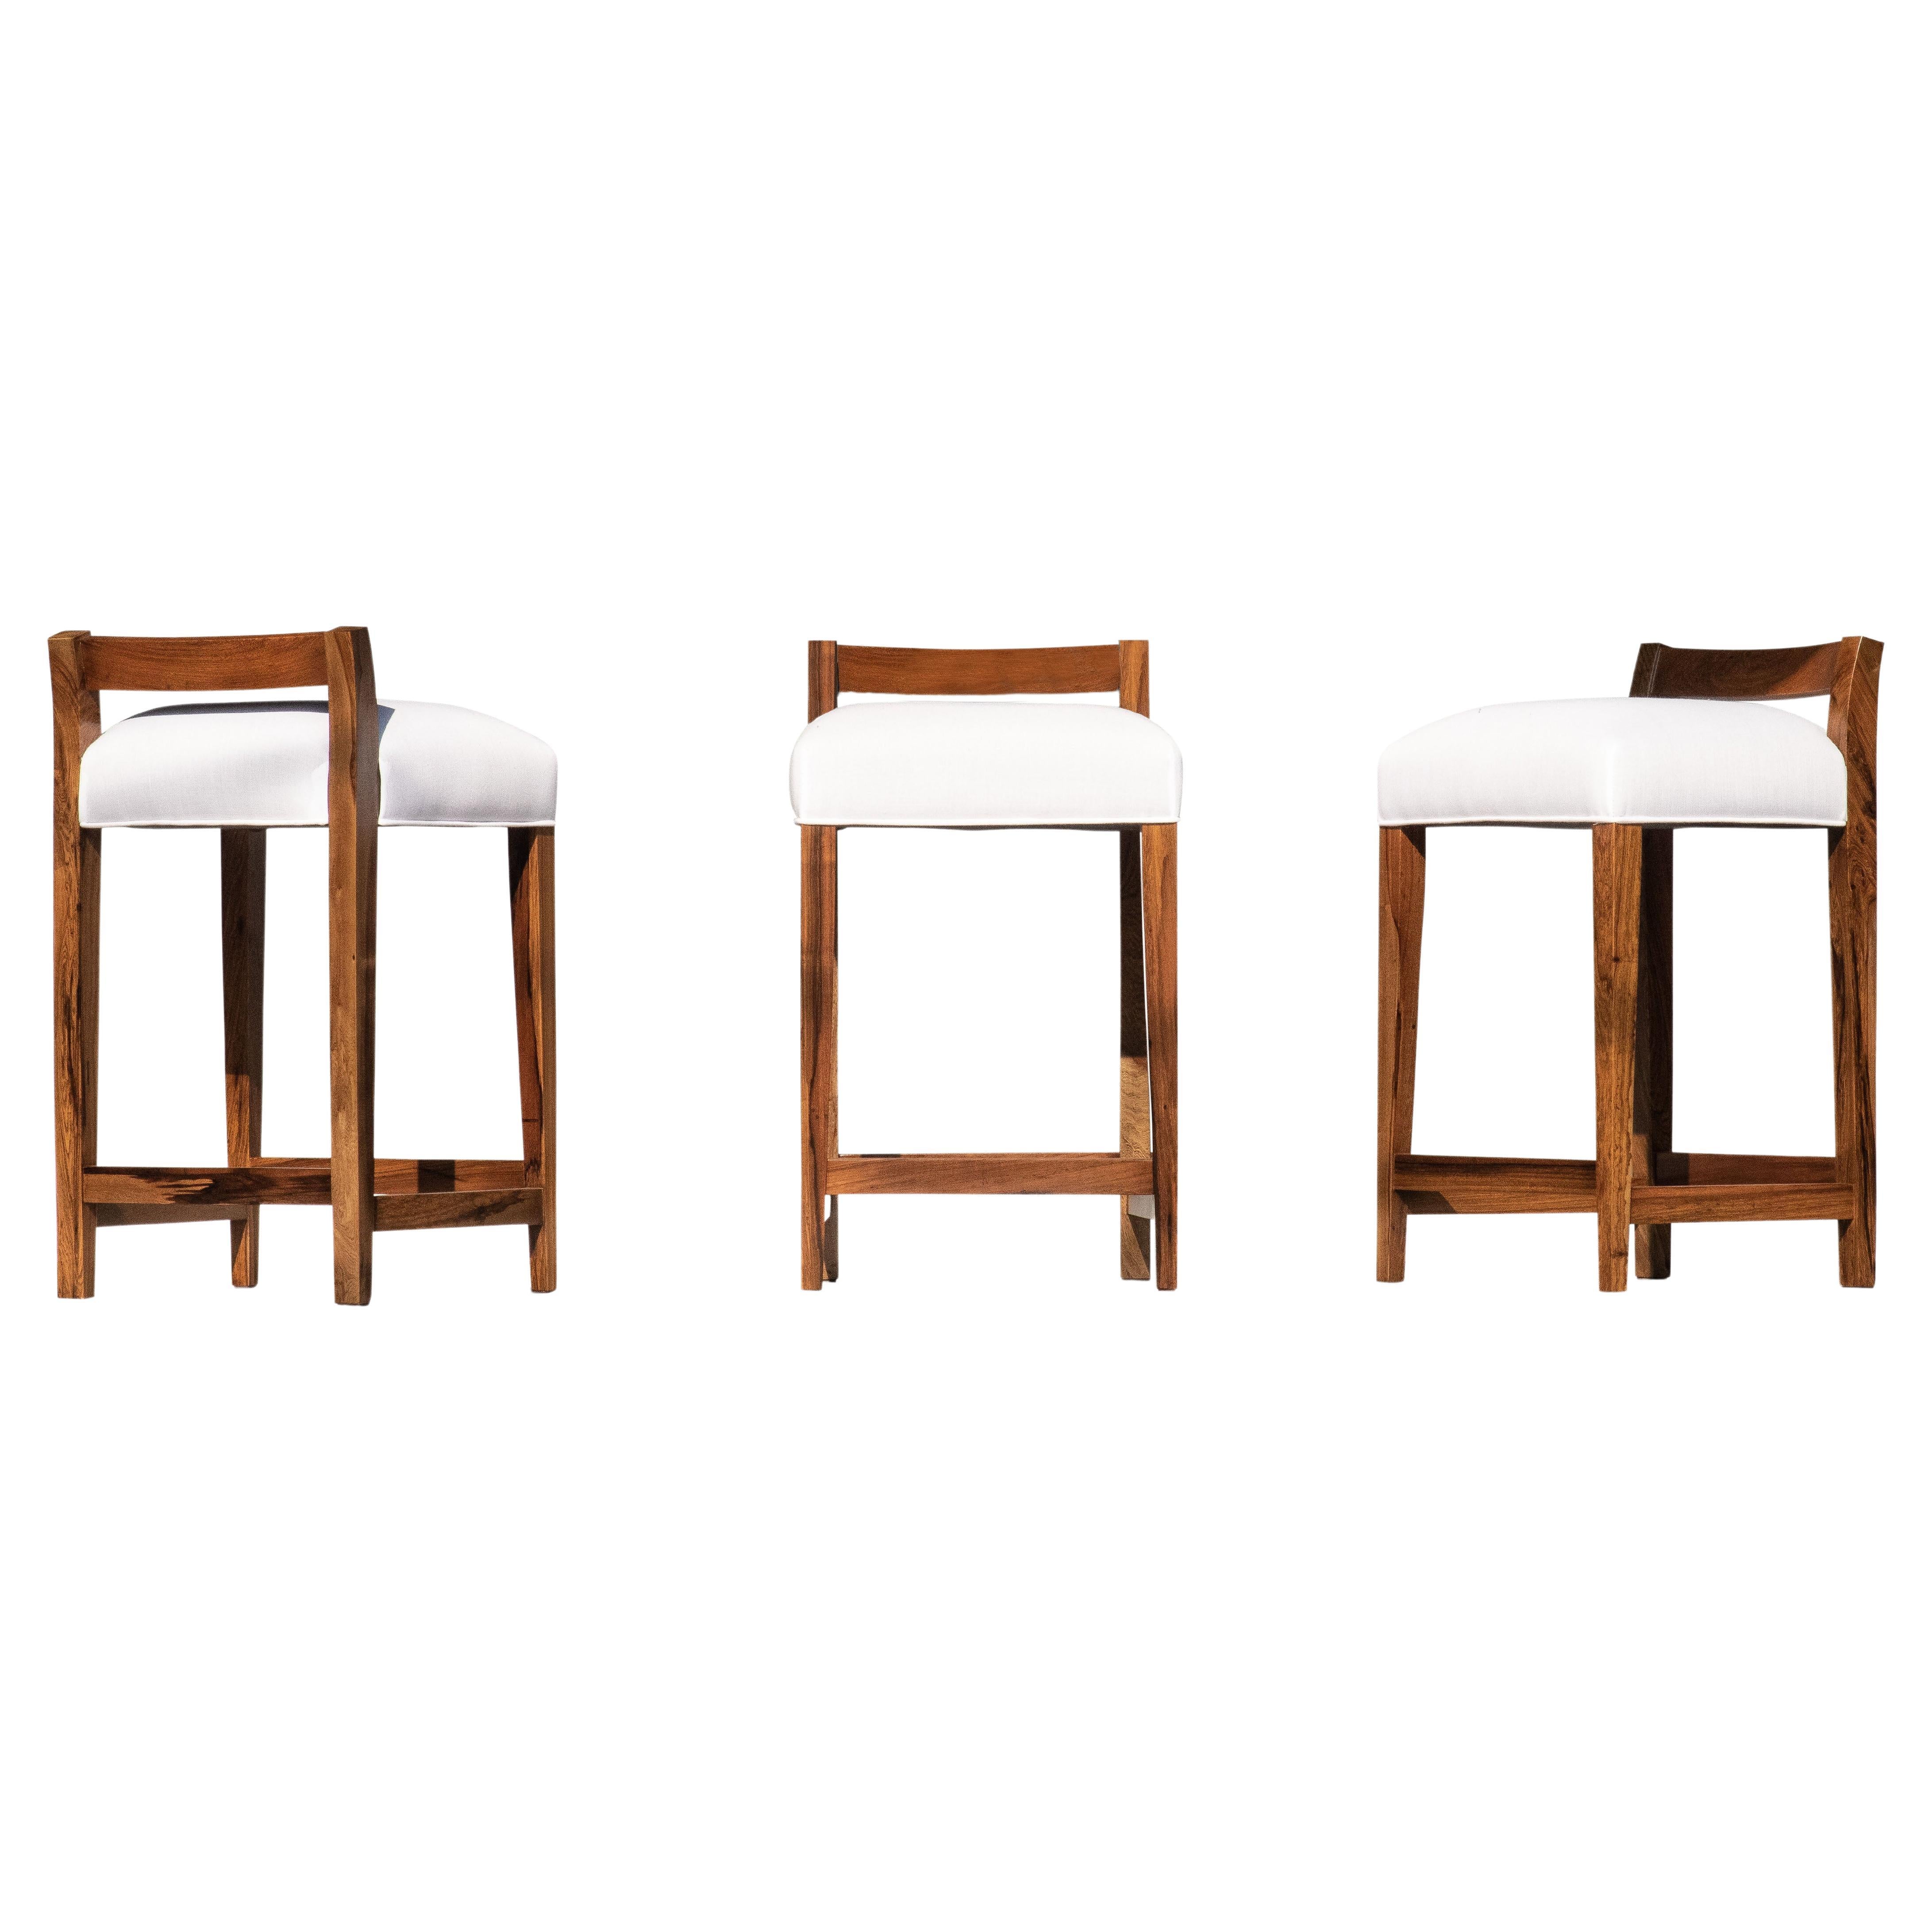 Set of 8 Exotic Argentine Rosewood Counter Stools from Costantini, Umberto